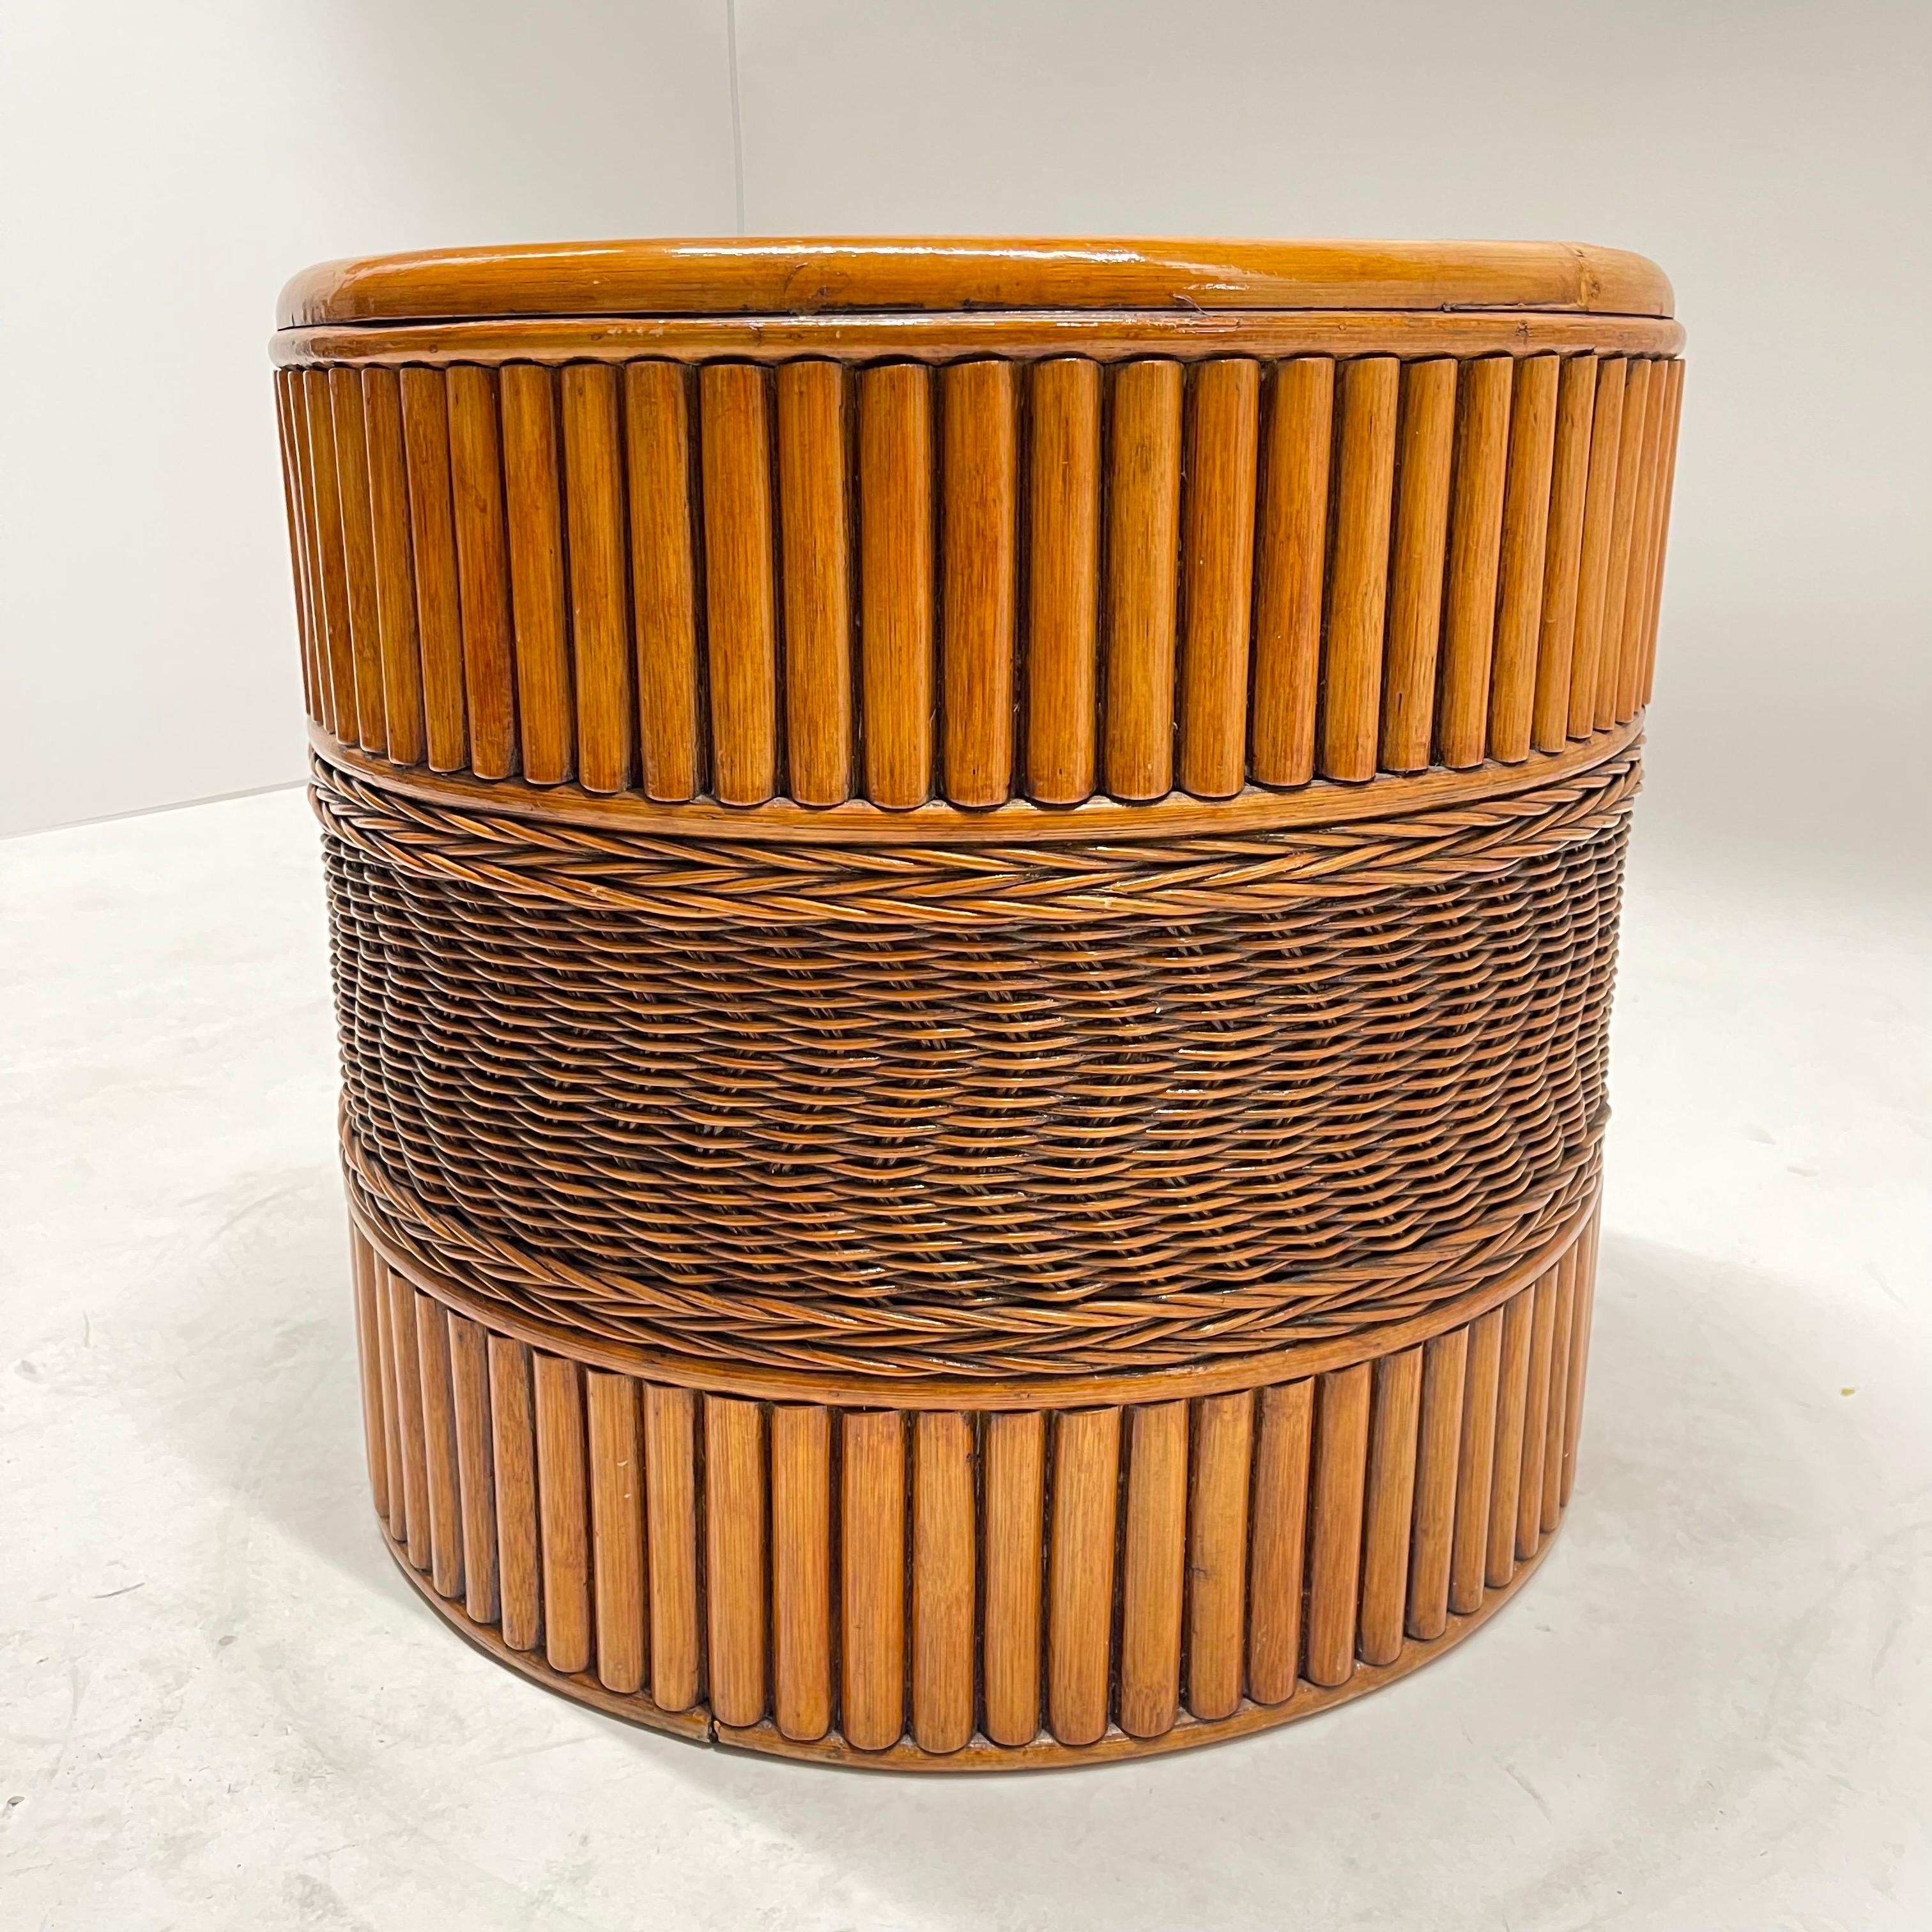 Stained Midcentury Wicker and Rattan Planter or Garden Pot, USA, 1970s